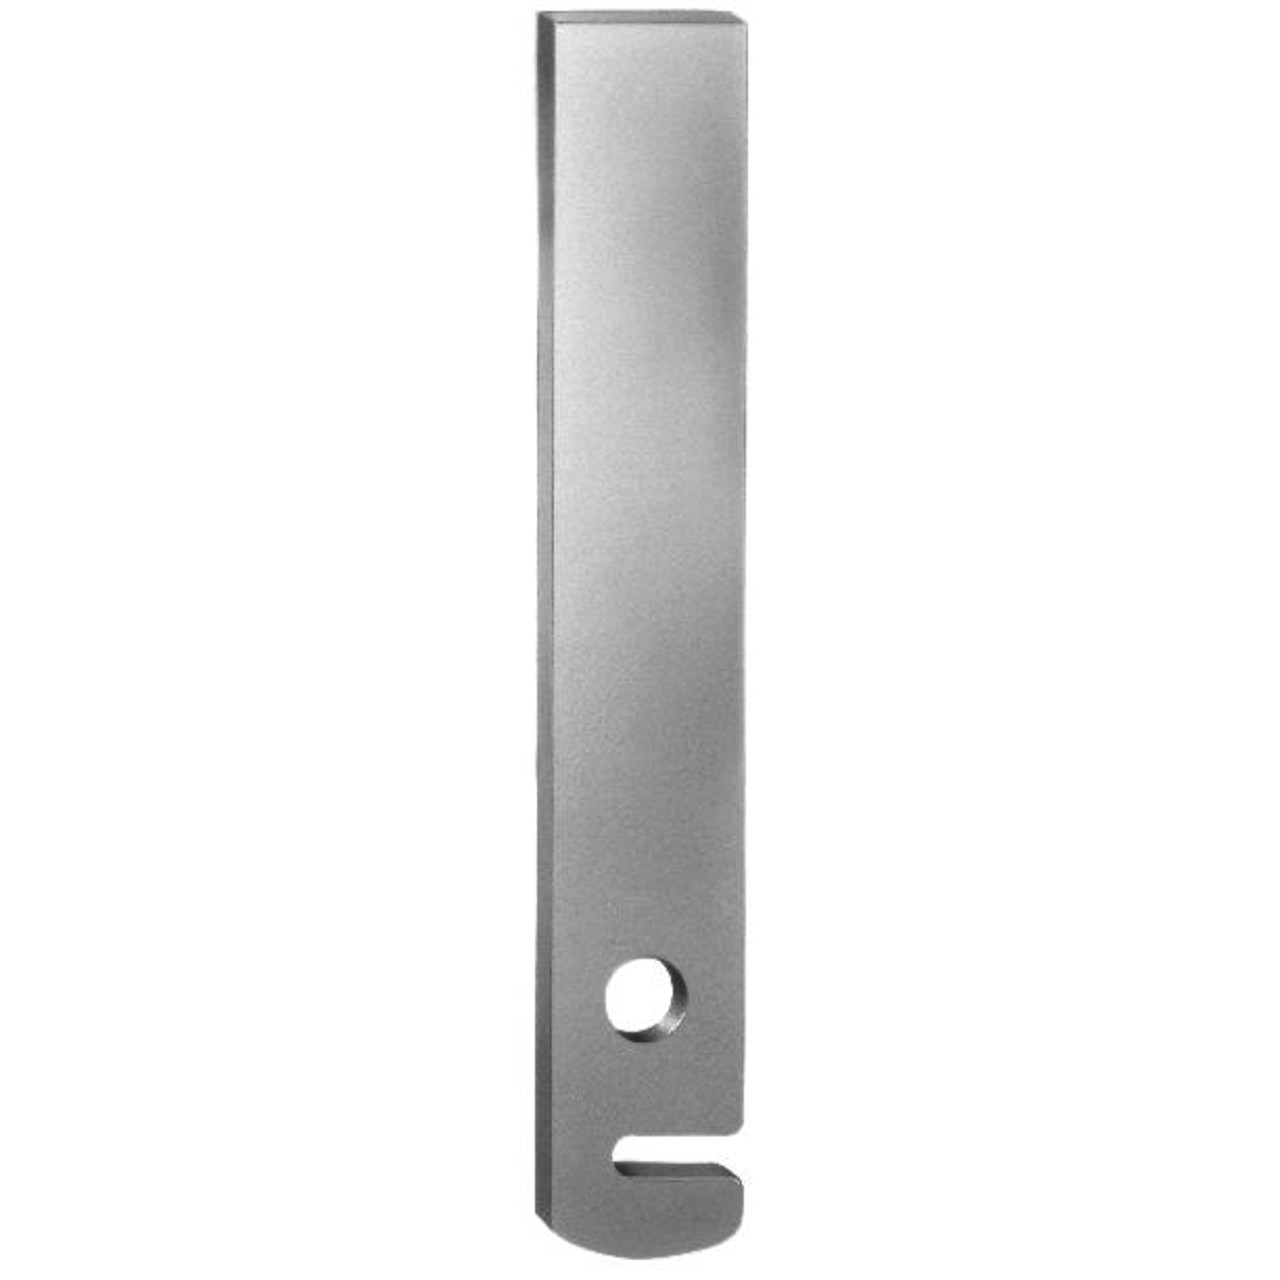 Compx Security Products Compx Extended bolt for C8163 drawer lock provides 3" extension C7163-2C 